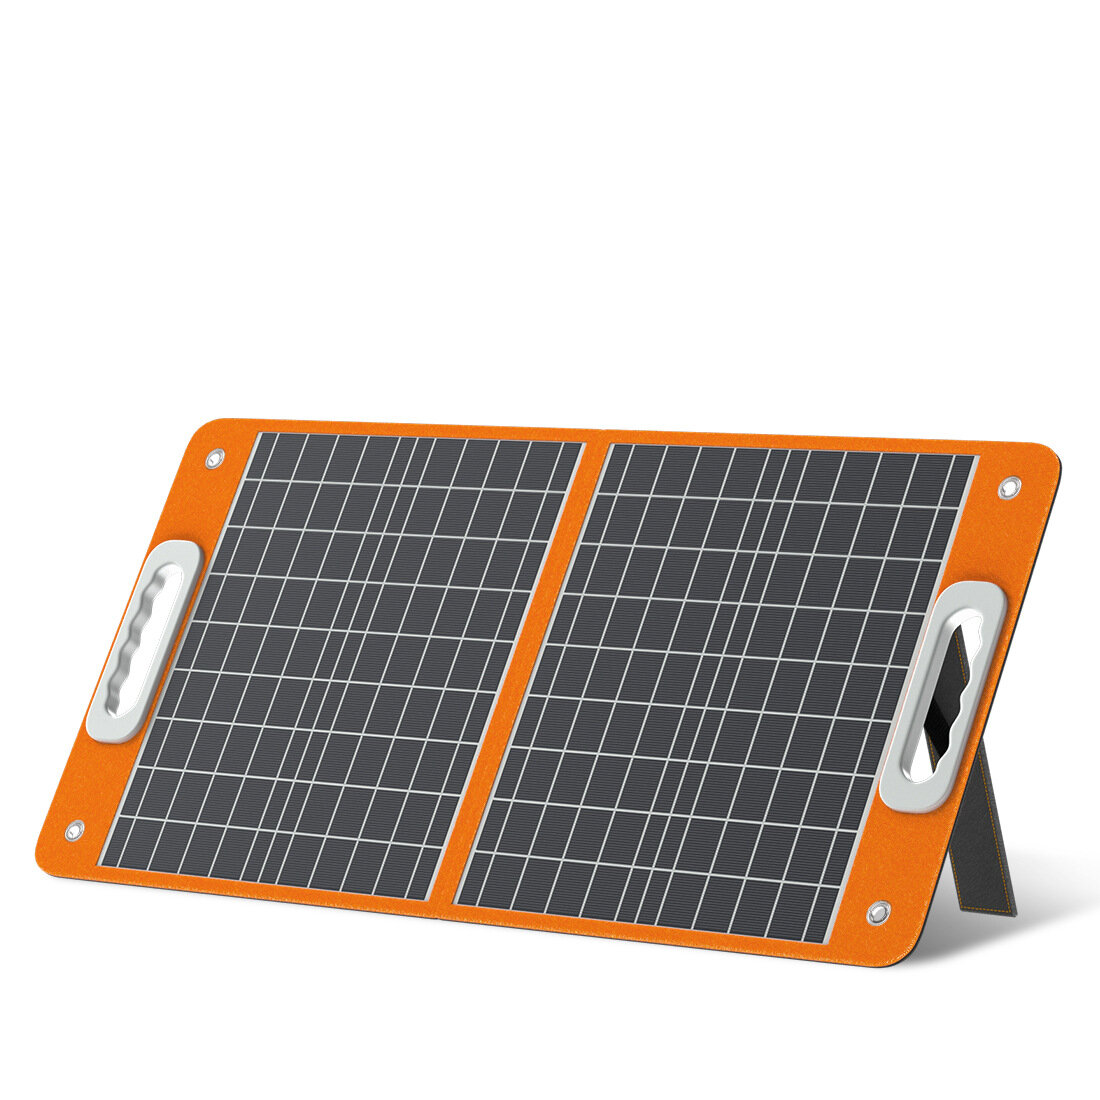 [EU Direct] FlashFish 18V 60W Foldable Solar Panel Portable Solar Charger with DC Output USB-C QC3.0 for Phones Tablets Camping Van RV Trip